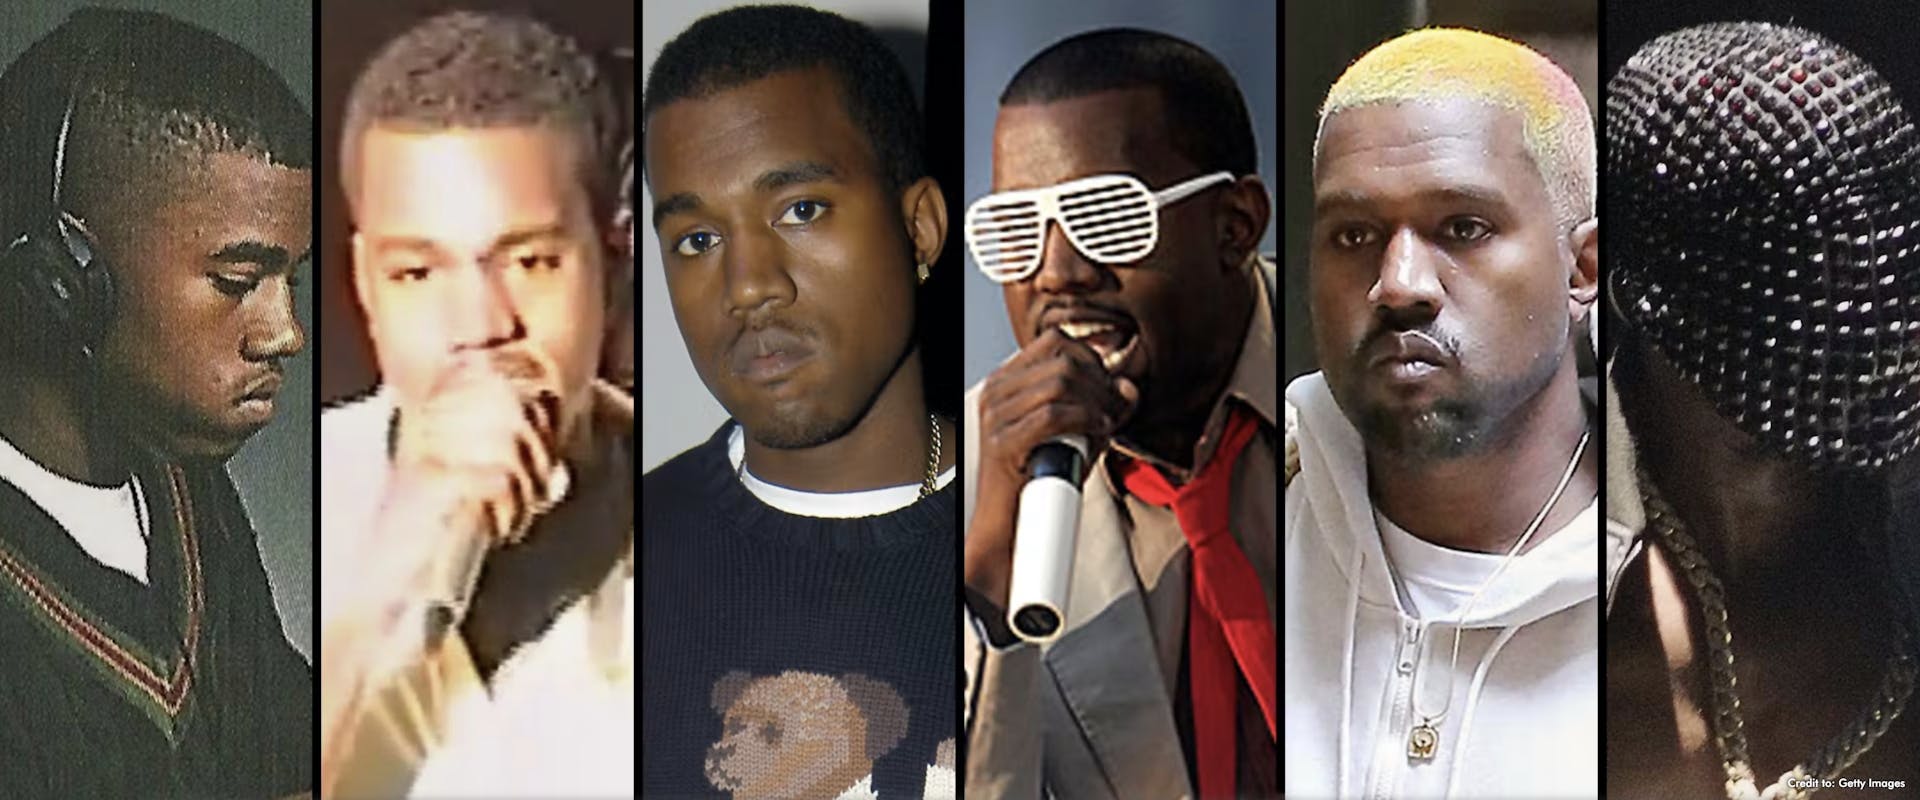 From 'College Dropout' to 'Donda': A Look at Kanye West's Style